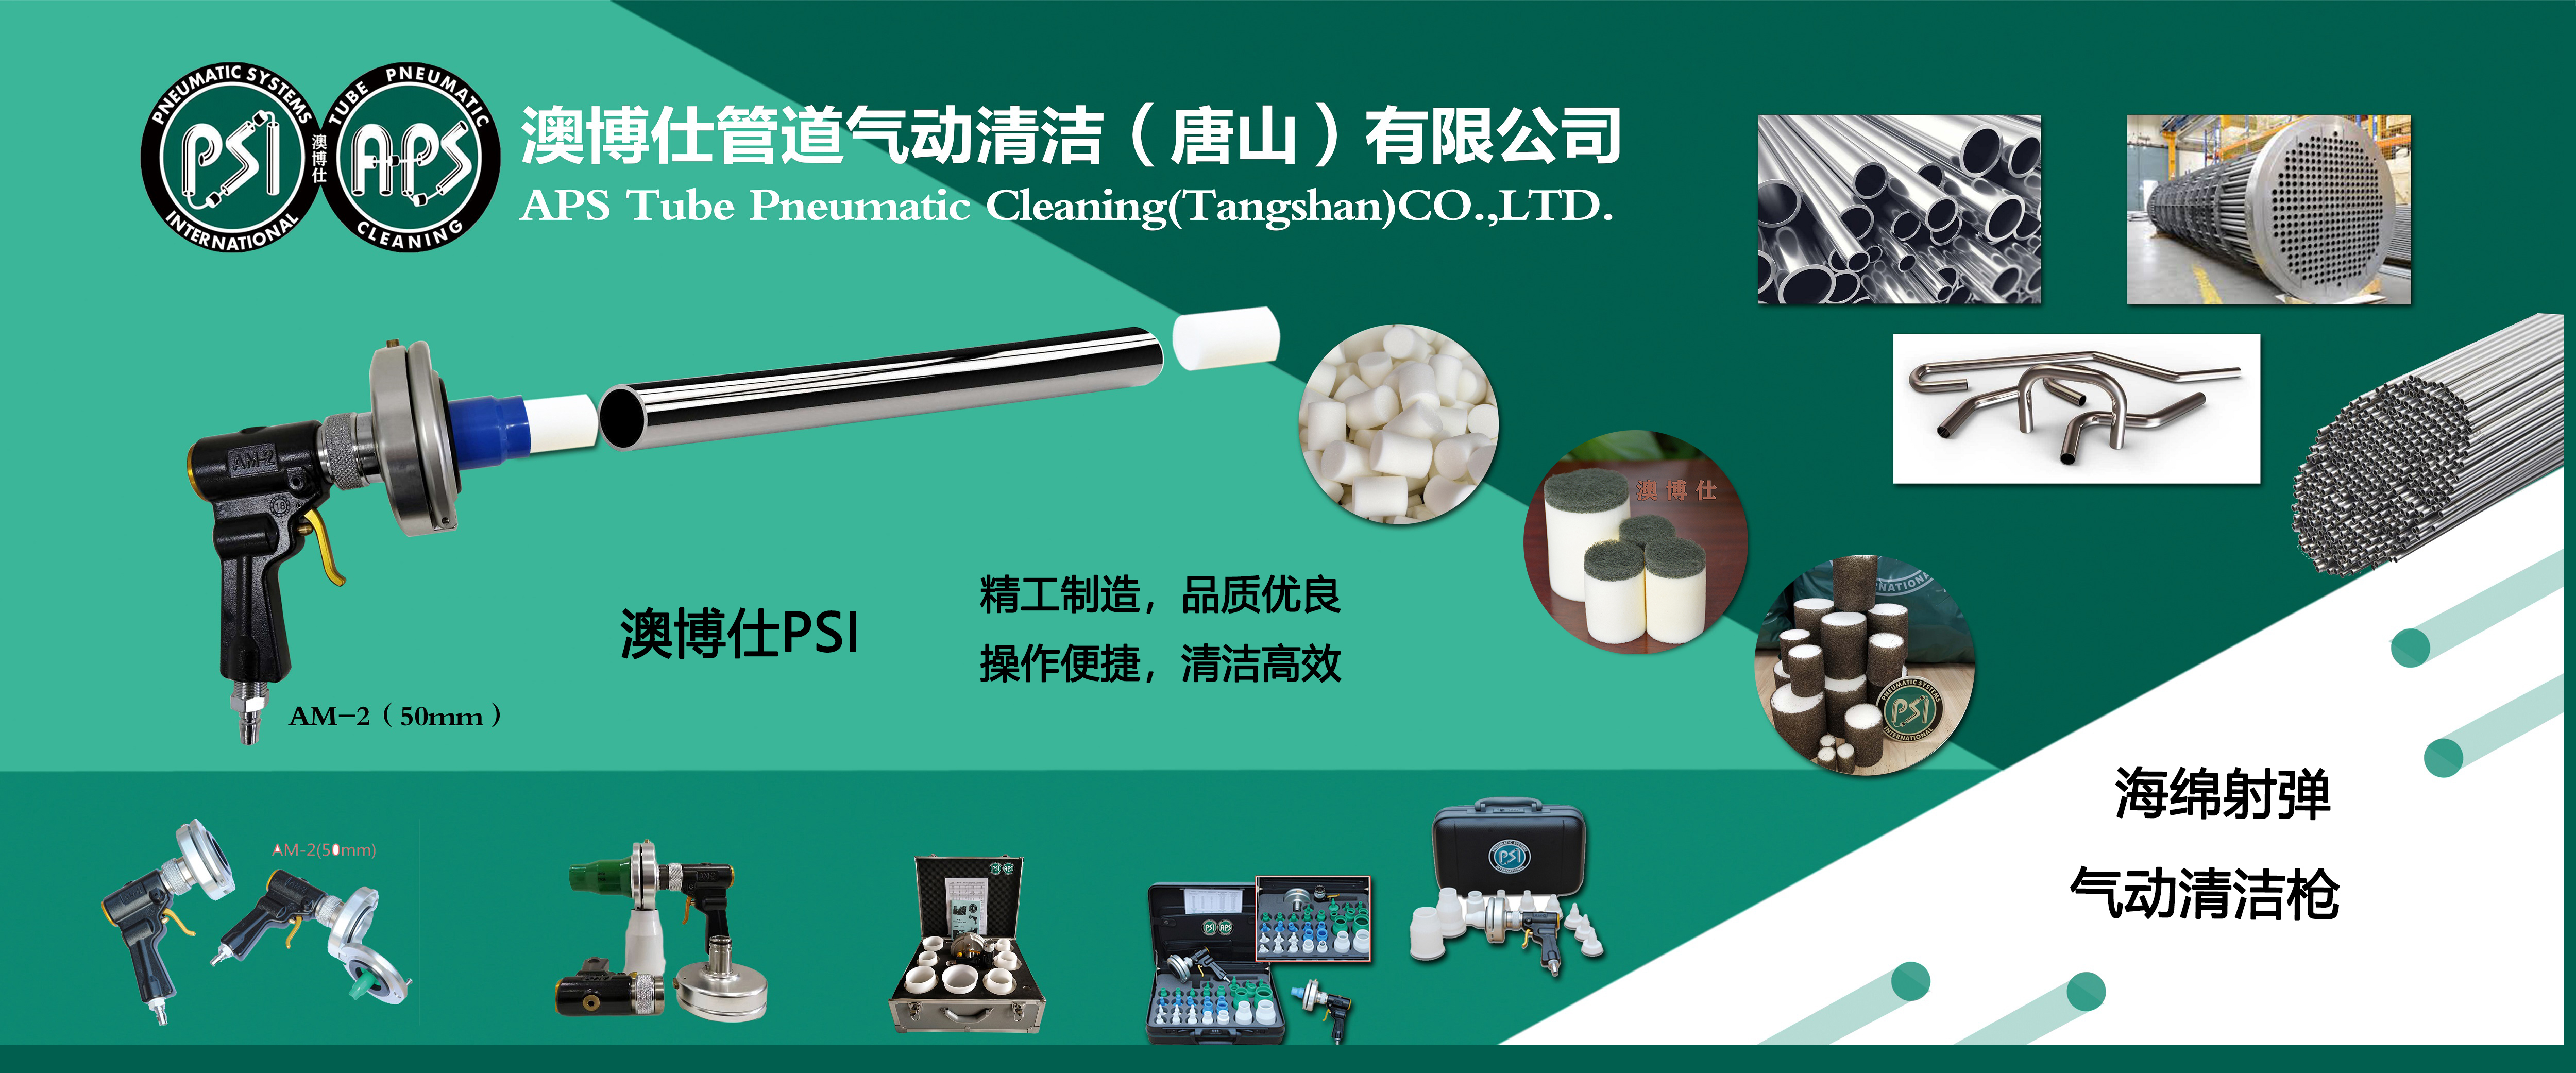 Pipeline cleaning equipment